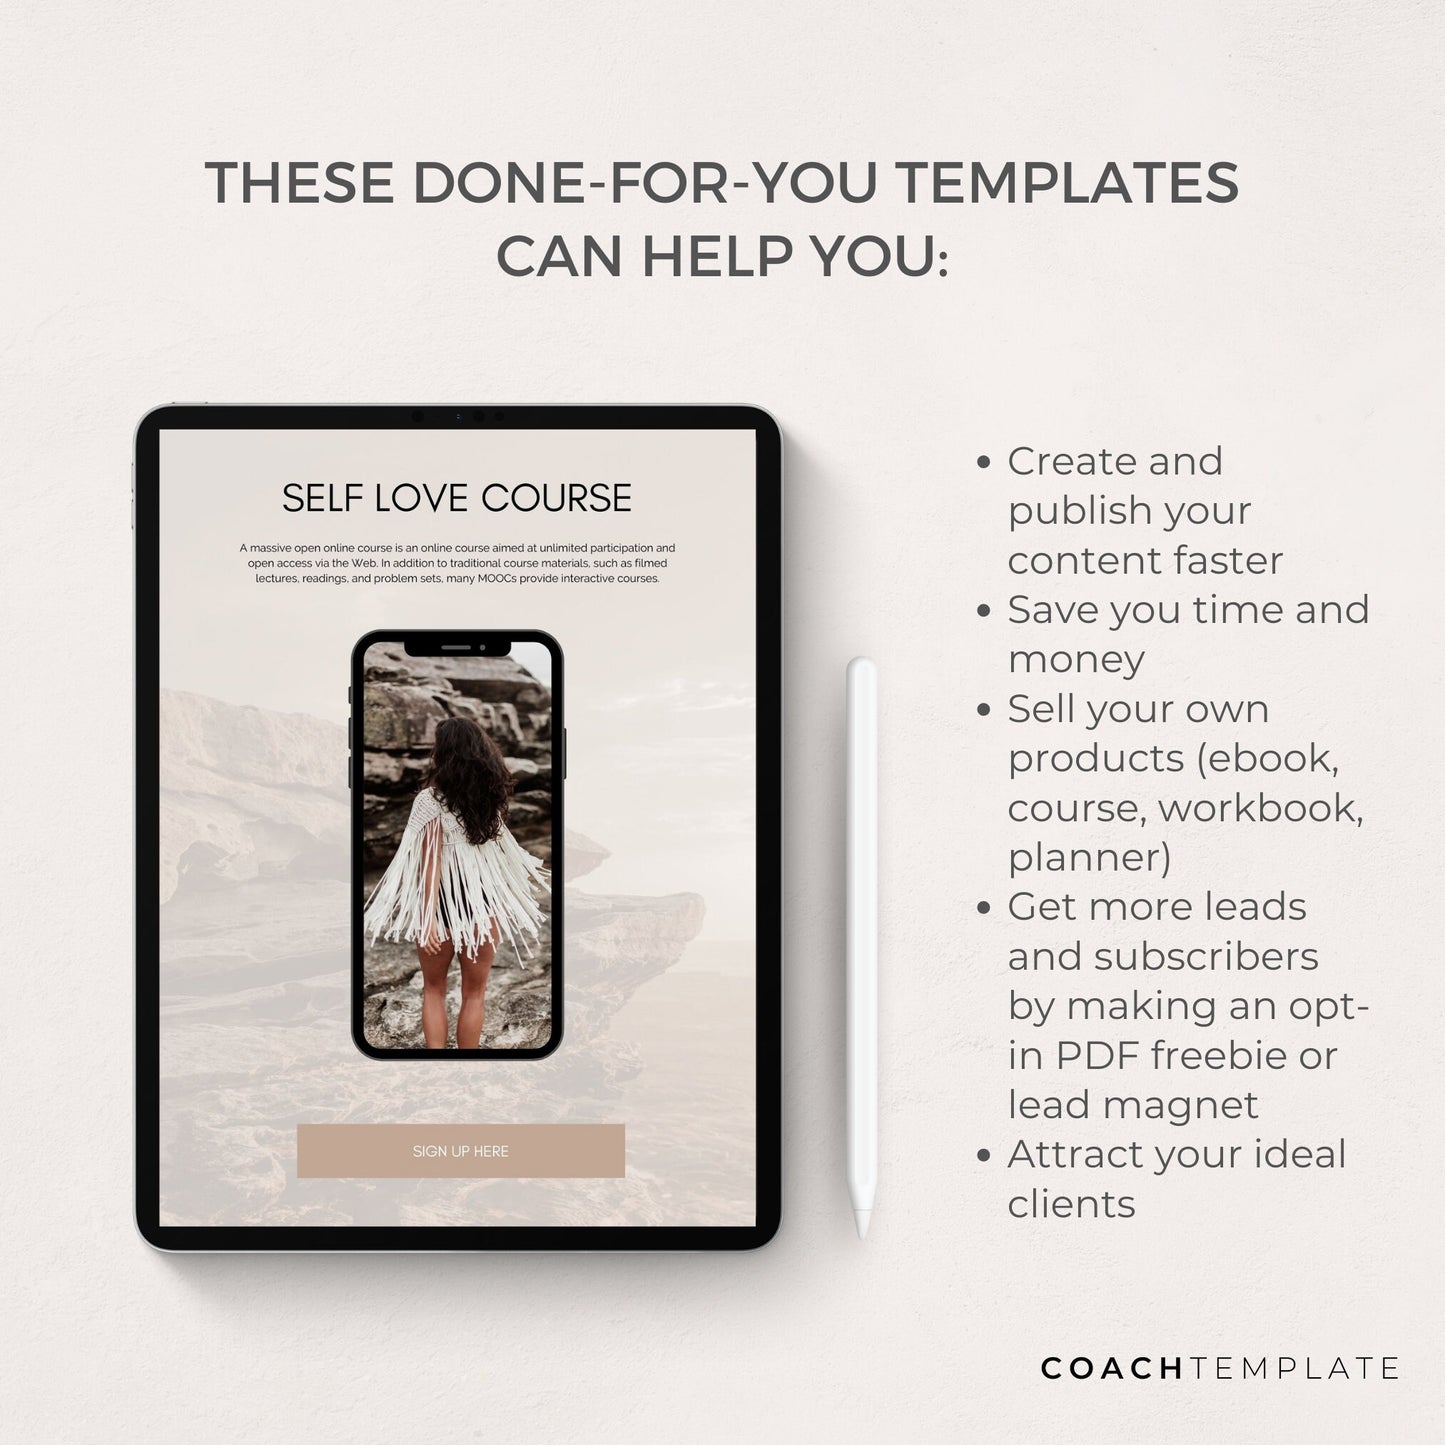 Self Love Challenge Planner Journal Canva Template - CoachTemplate.com CT034

Editable Self Love Challenge Planner Journal Canva Template | Workbook Lead Magnet Life Coaching business wellness blogger | Commercial Use